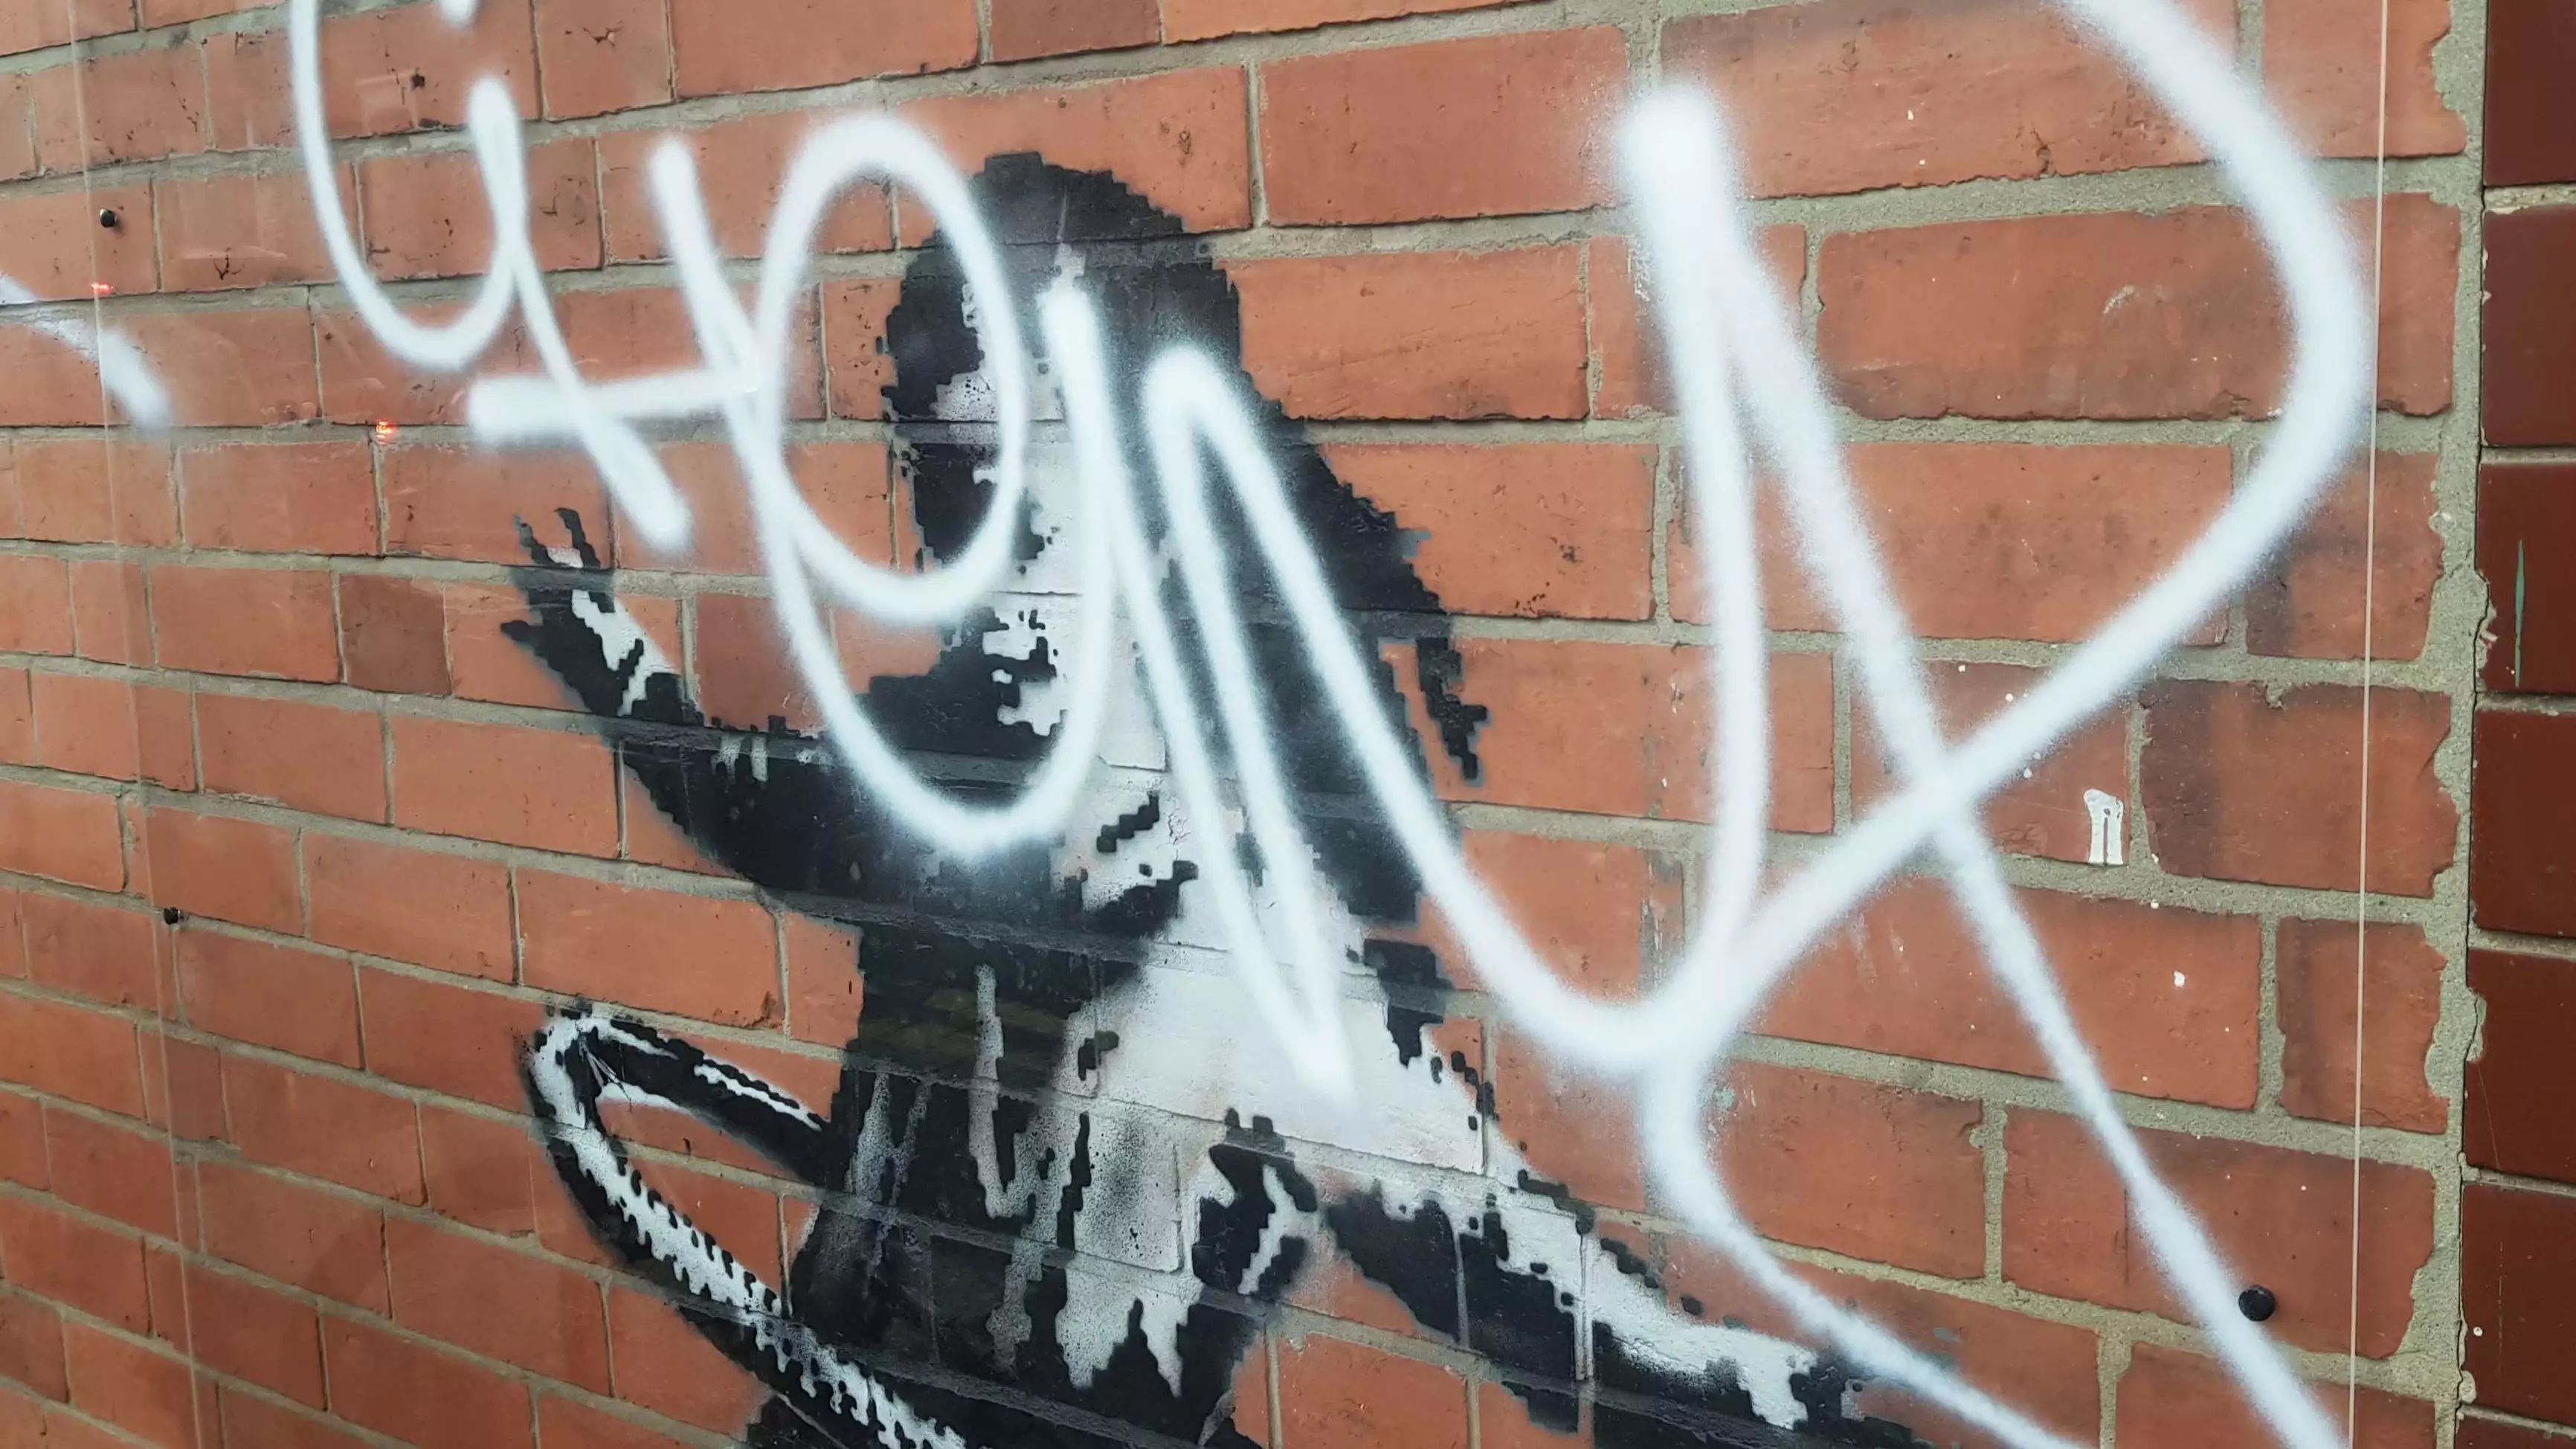 Someone Has Graffitied Over A Banksy Artwork In Nottingham